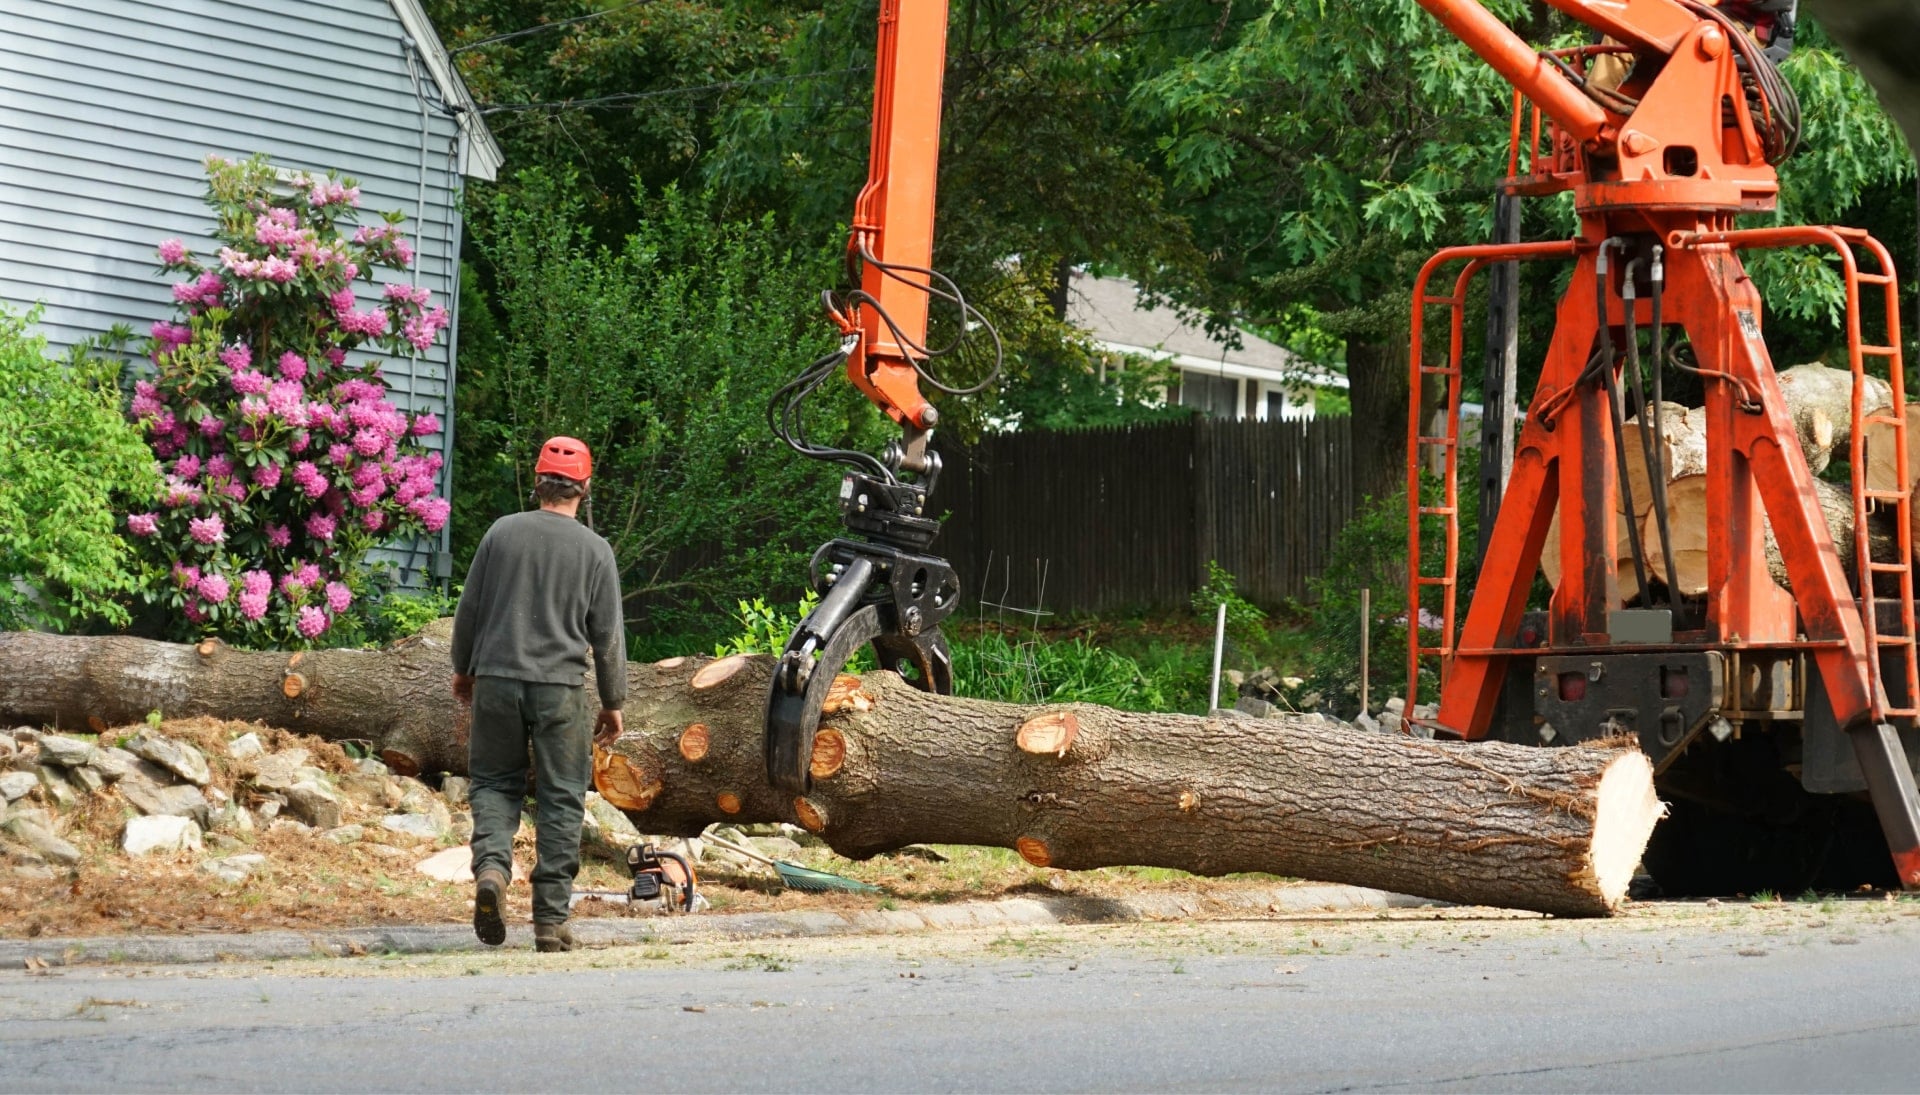 Local partner for Tree removal services in Pittsburgh